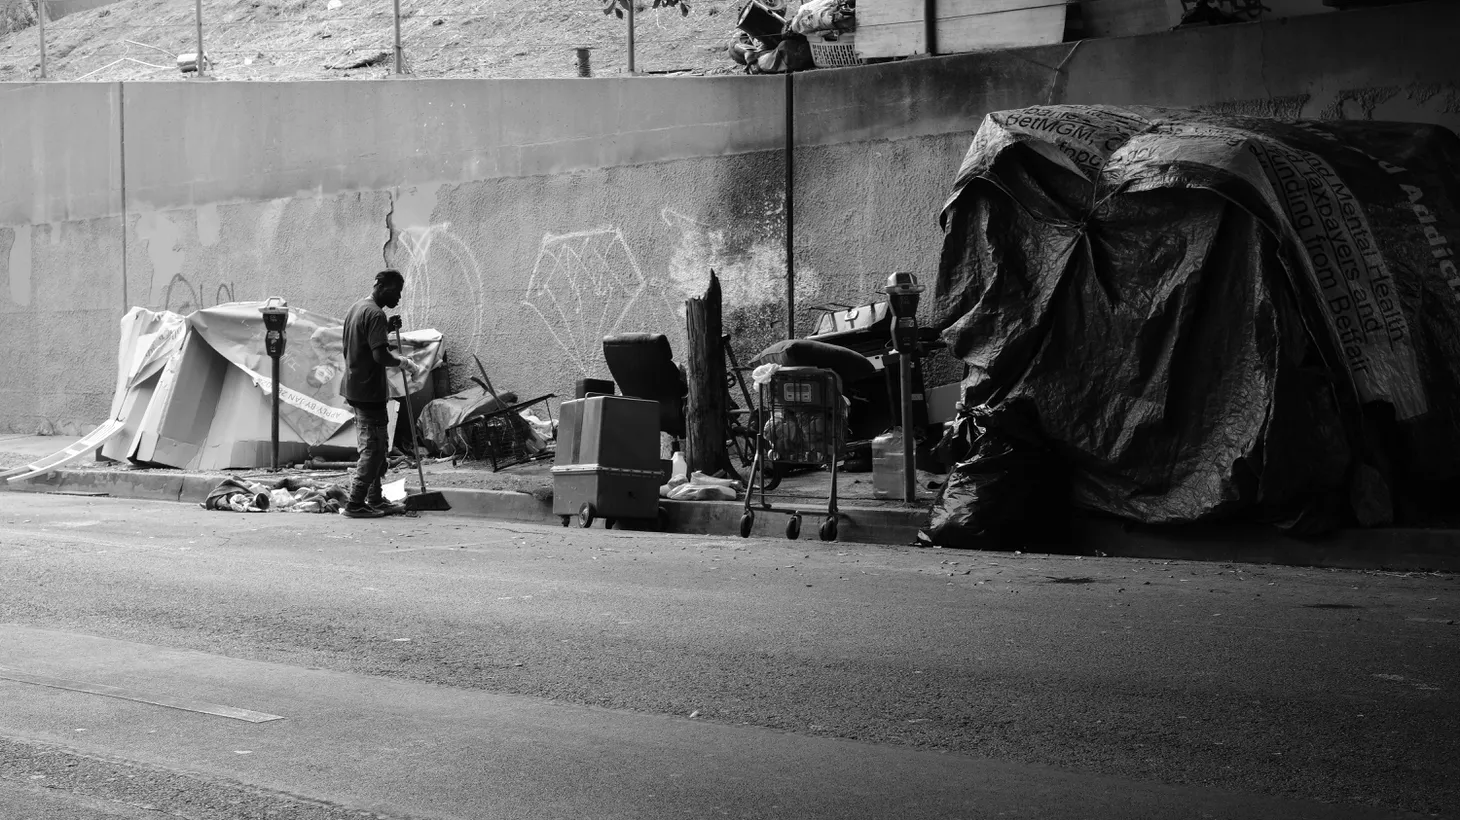 A homeless encampment is seen in downtown LA, October 14, 2022. This year, in the worst winter weather, the Los Angeles Homeless Service Authority will provide just over 600 extra shelter beds to serve the nearly 50,000 Angelenos who sleep on the streets every night.